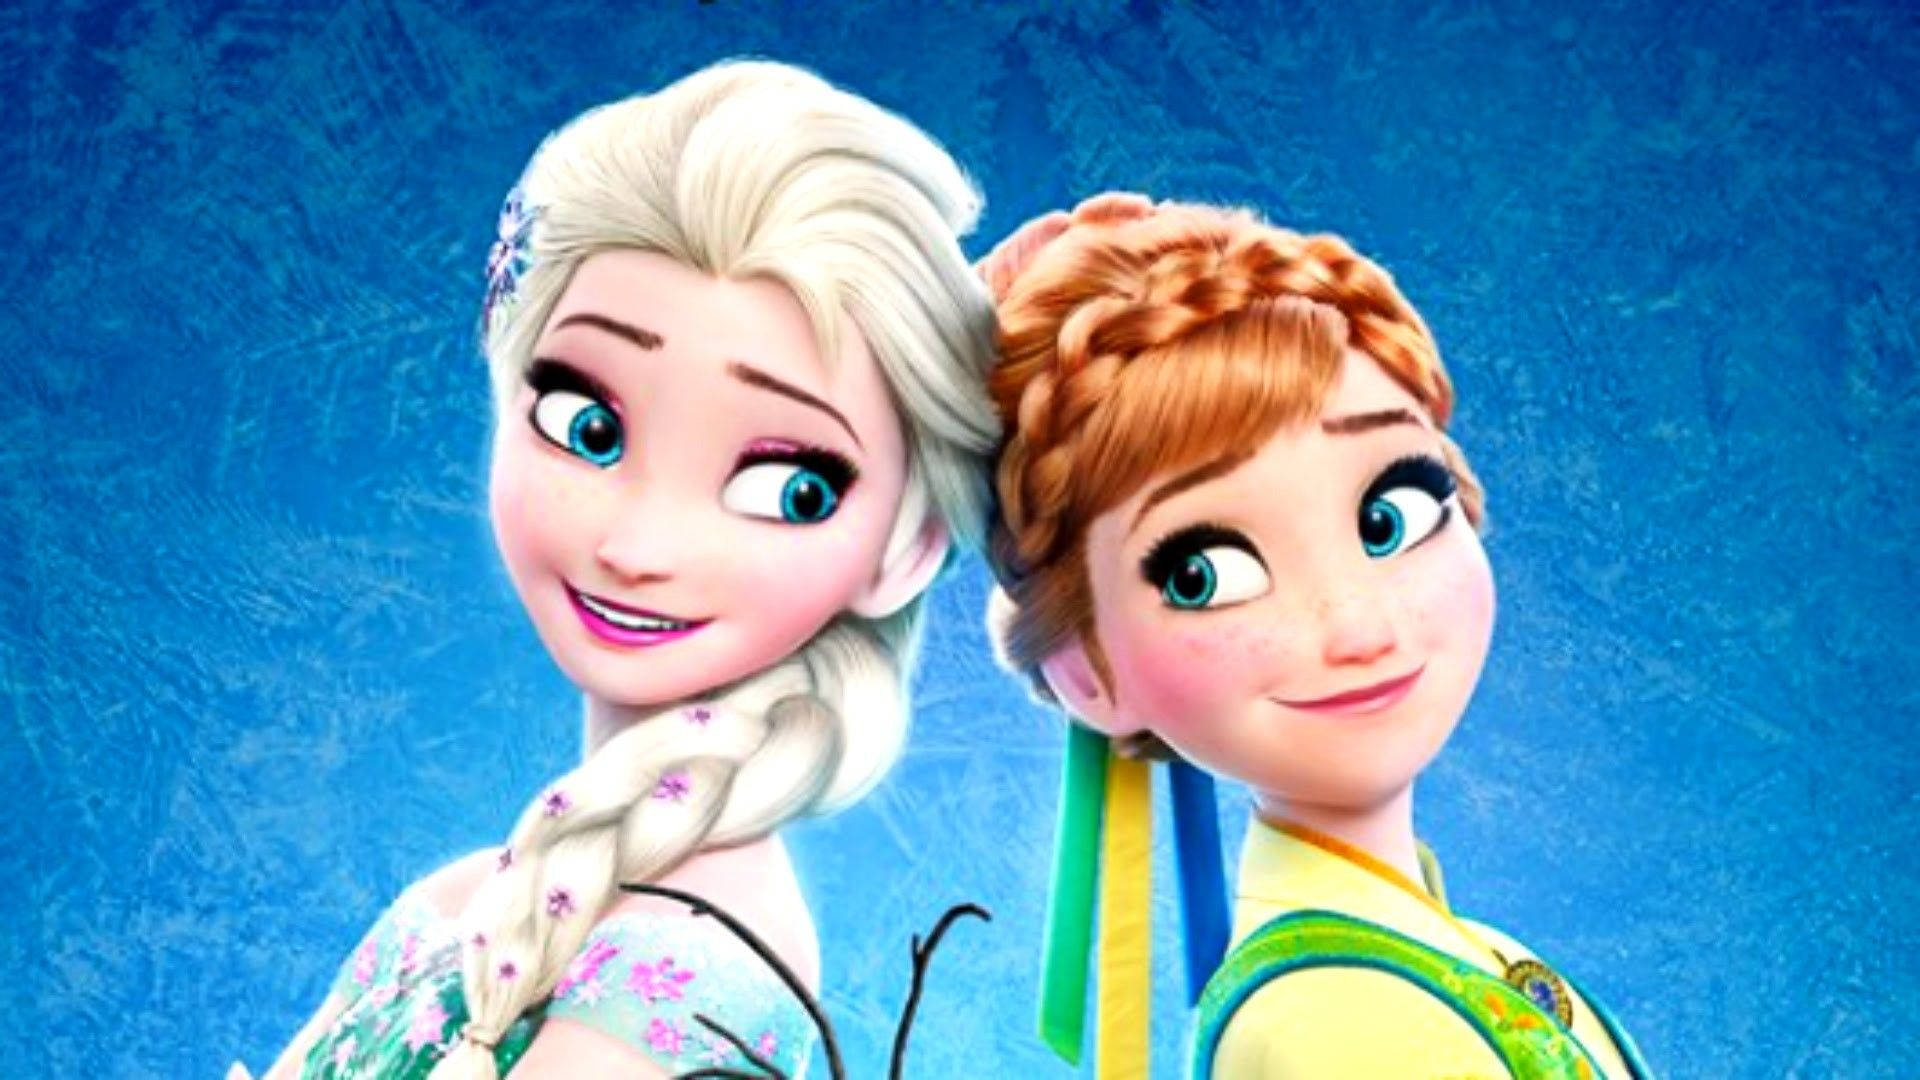 Elsa and Anna Join Forces in Disney’s Frozen 2 Wallpaper